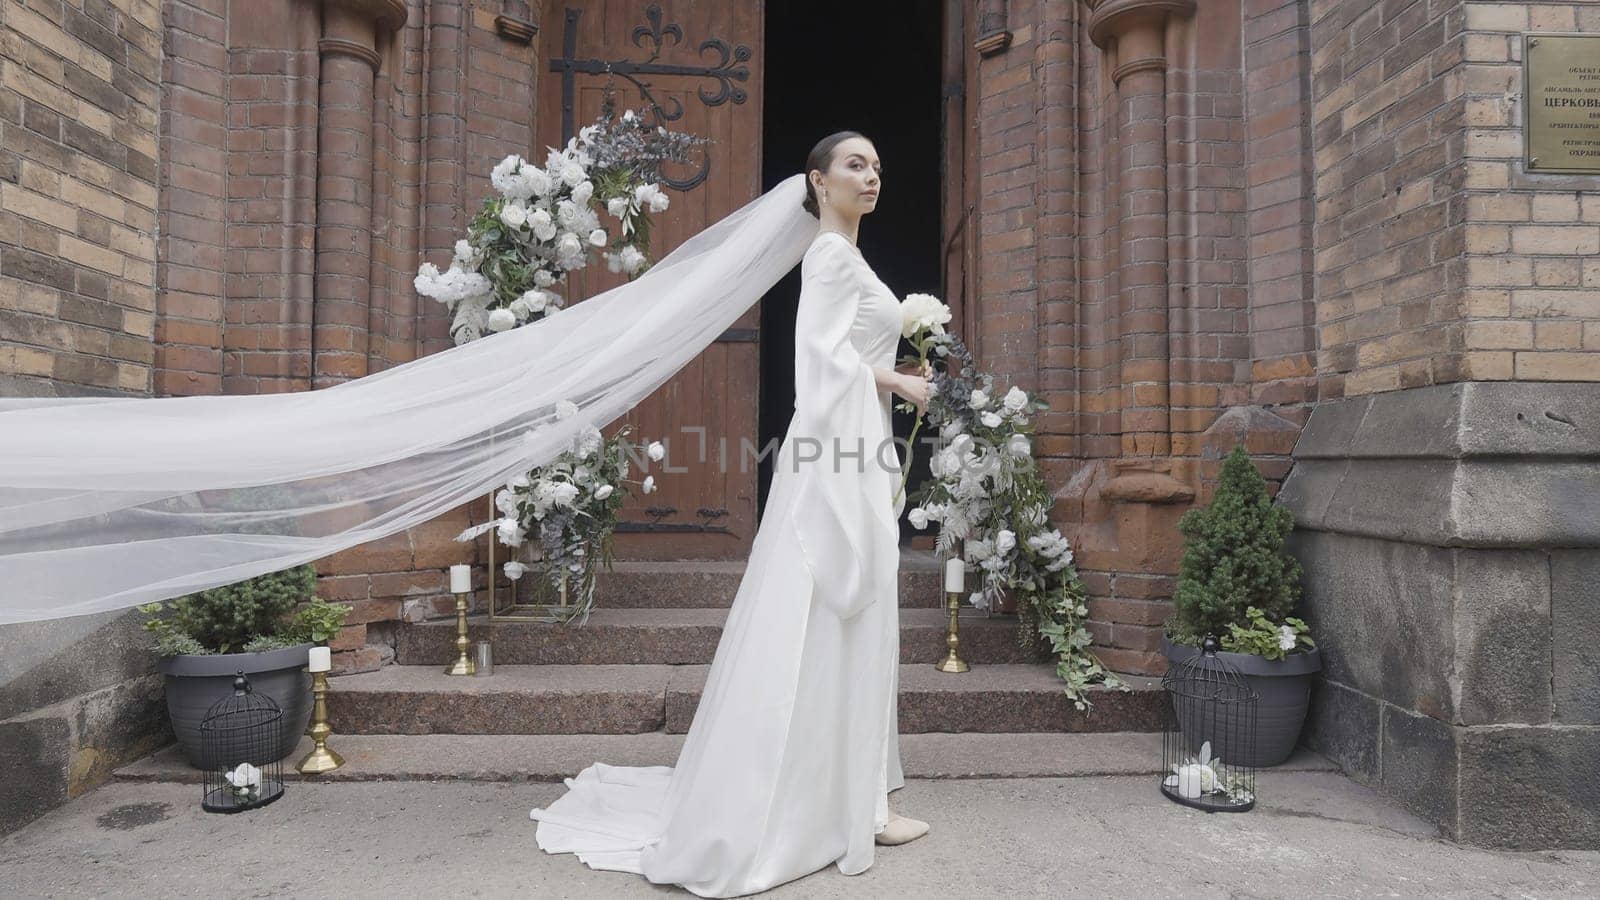 Elegant bride at entrance to church. Action. Luxurious bridal veil with bouquet at church. Beautiful bride's outfit with long veil by Mediawhalestock